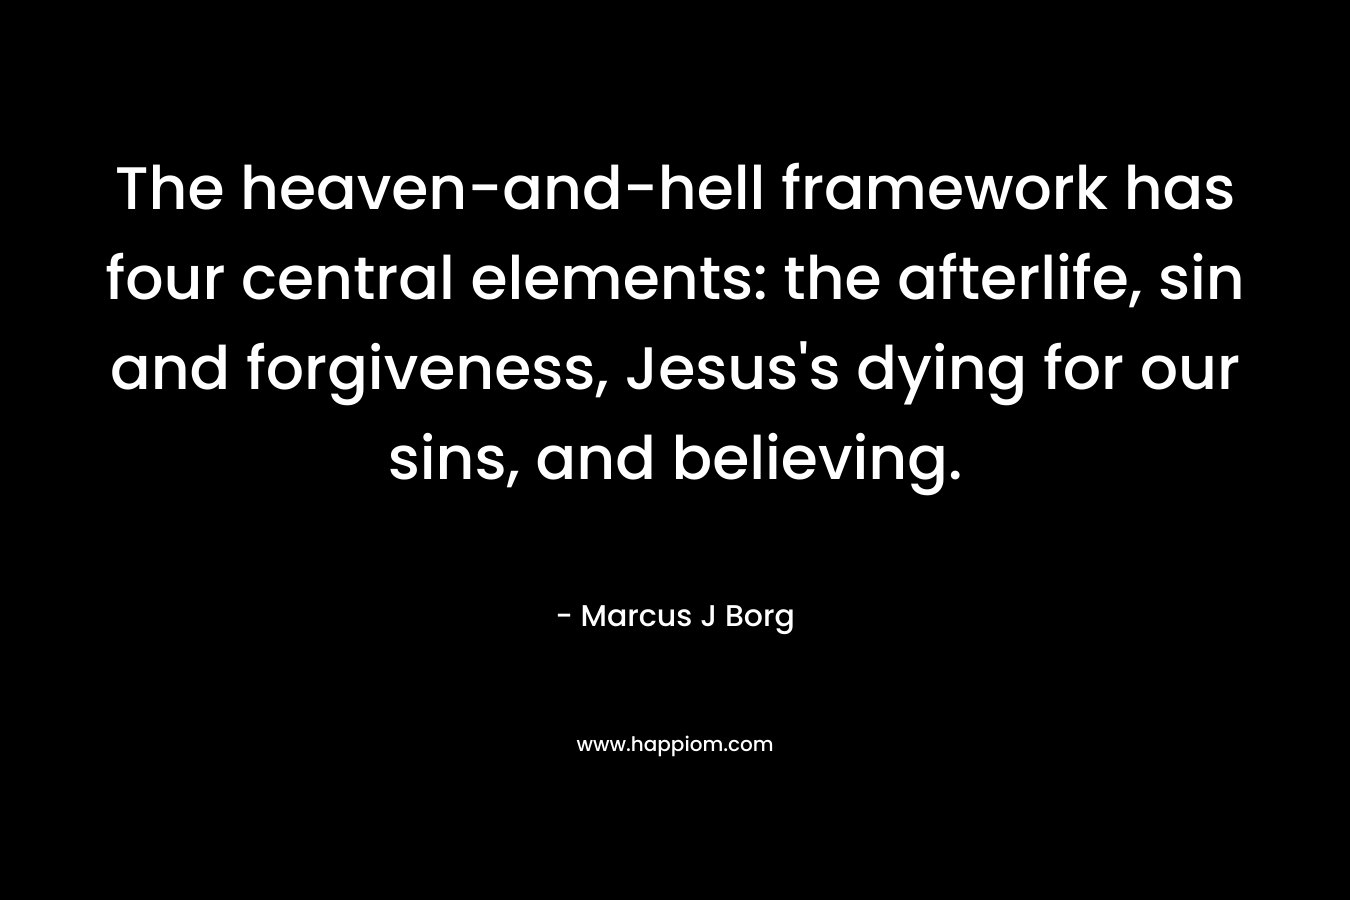 The heaven-and-hell framework has four central elements: the afterlife, sin and forgiveness, Jesus's dying for our sins, and believing.